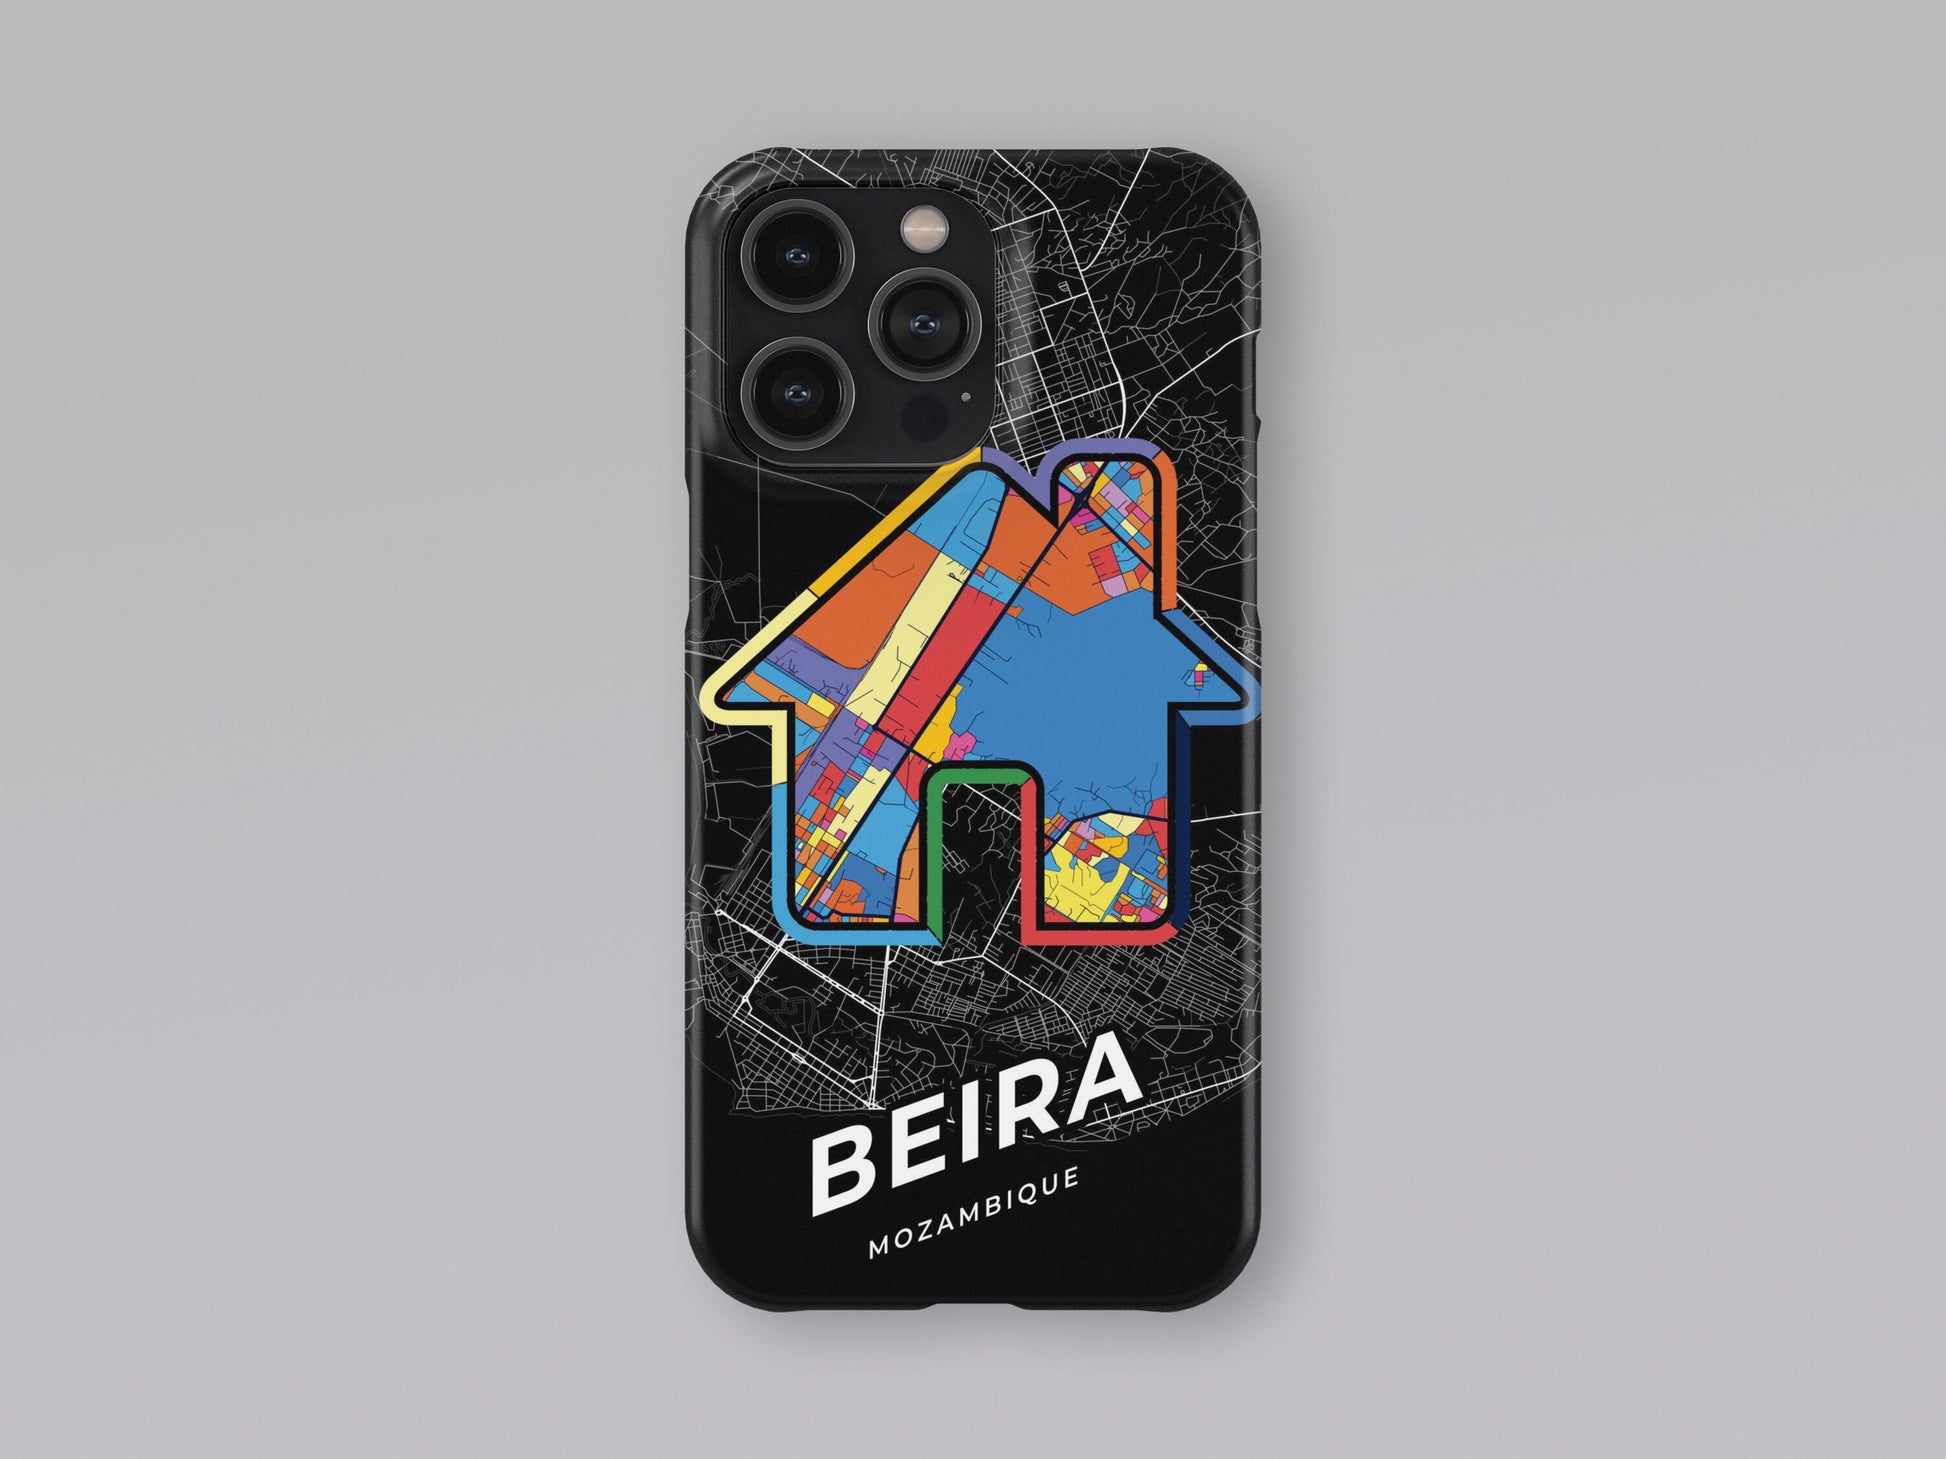 Beira Mozambique slim phone case with colorful icon. Birthday, wedding or housewarming gift. Couple match cases. 3